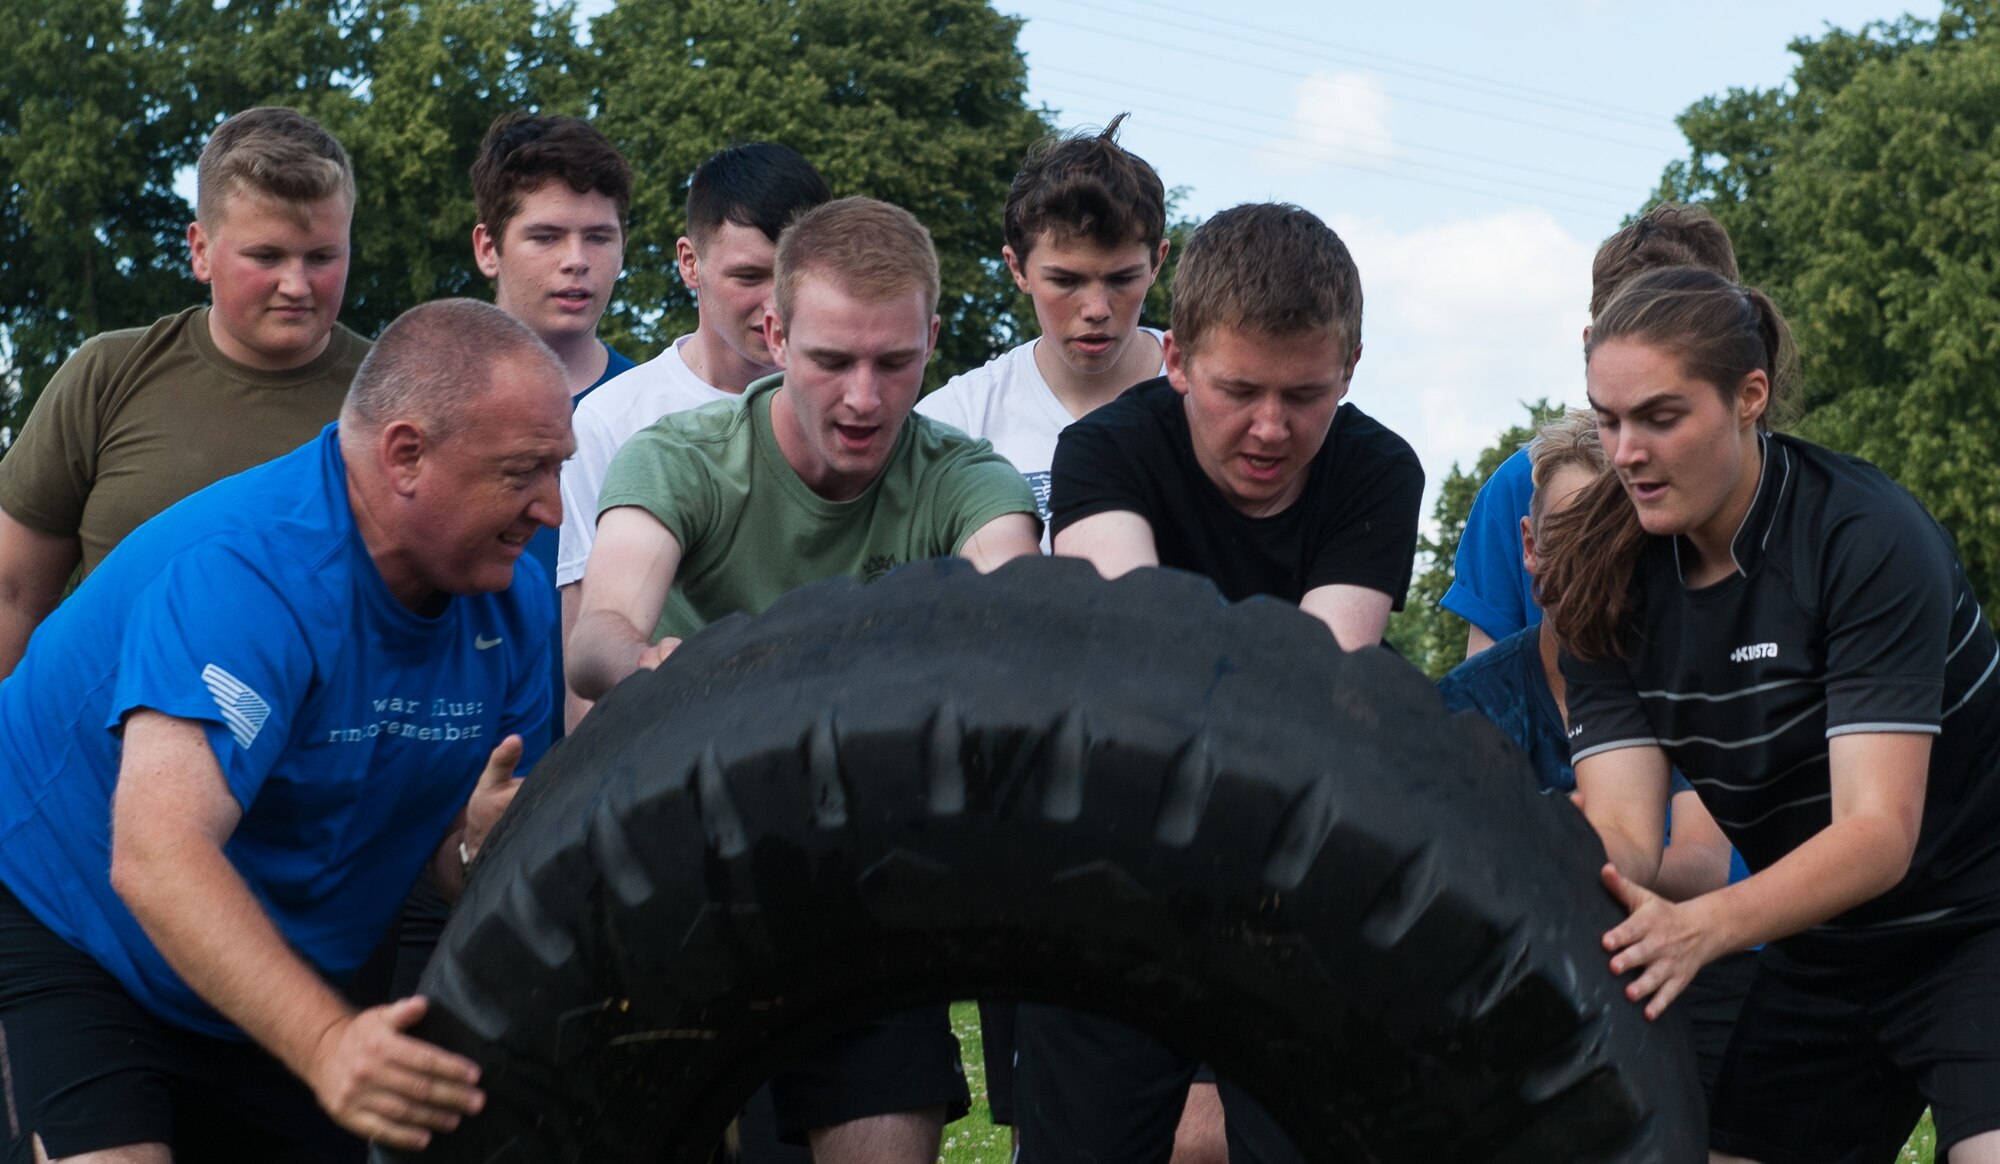 Royal Air Force cadets flip a tire during Warrior Day, a physical regimen hosted by the Kisling NCO Academy Aug. 8, at Vogelweh Military Complex, Germany.  Warrior Day is an annual mentorship program between the Air Force and the United Kingdom, where NCOA cadre provide insight on how Airmen train and stay educated. This event serves as a way for the U.S. continues to strengthen its relationship with the U.K. by showing the air cadets how the Kaiserslautern Military Community works together and through physical exercises. (U.S. Air force photo/Airman 1st Class Lane T. Plummer)